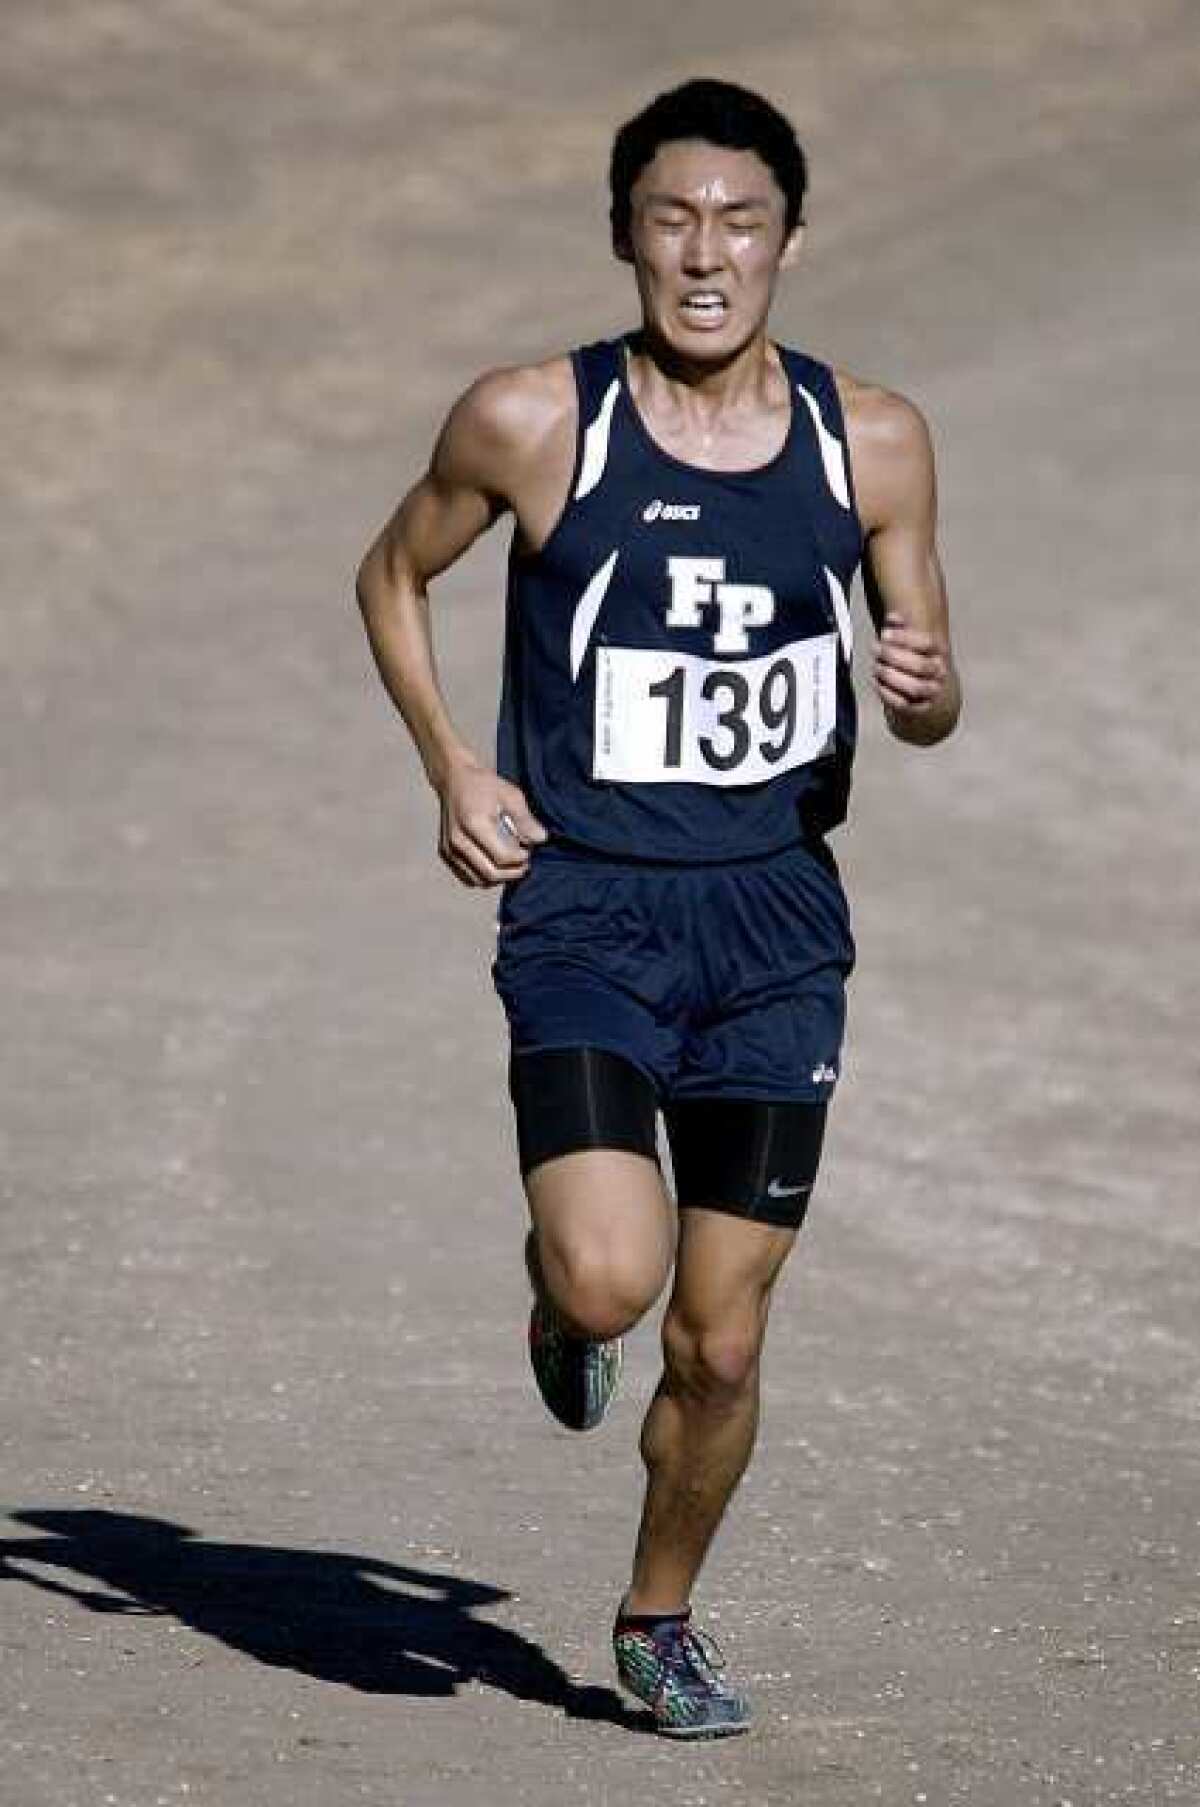 ARCHIVE PHOTO: Flintridge Prep's Aaron Sugimoto leaves the competition behind to win the Prep League Boys Varsity Cross-Country race at Pierce College in Woodland Hills on Saturday, Oct. 27, 2012. The Flintridge Prep boys won the league title as well.